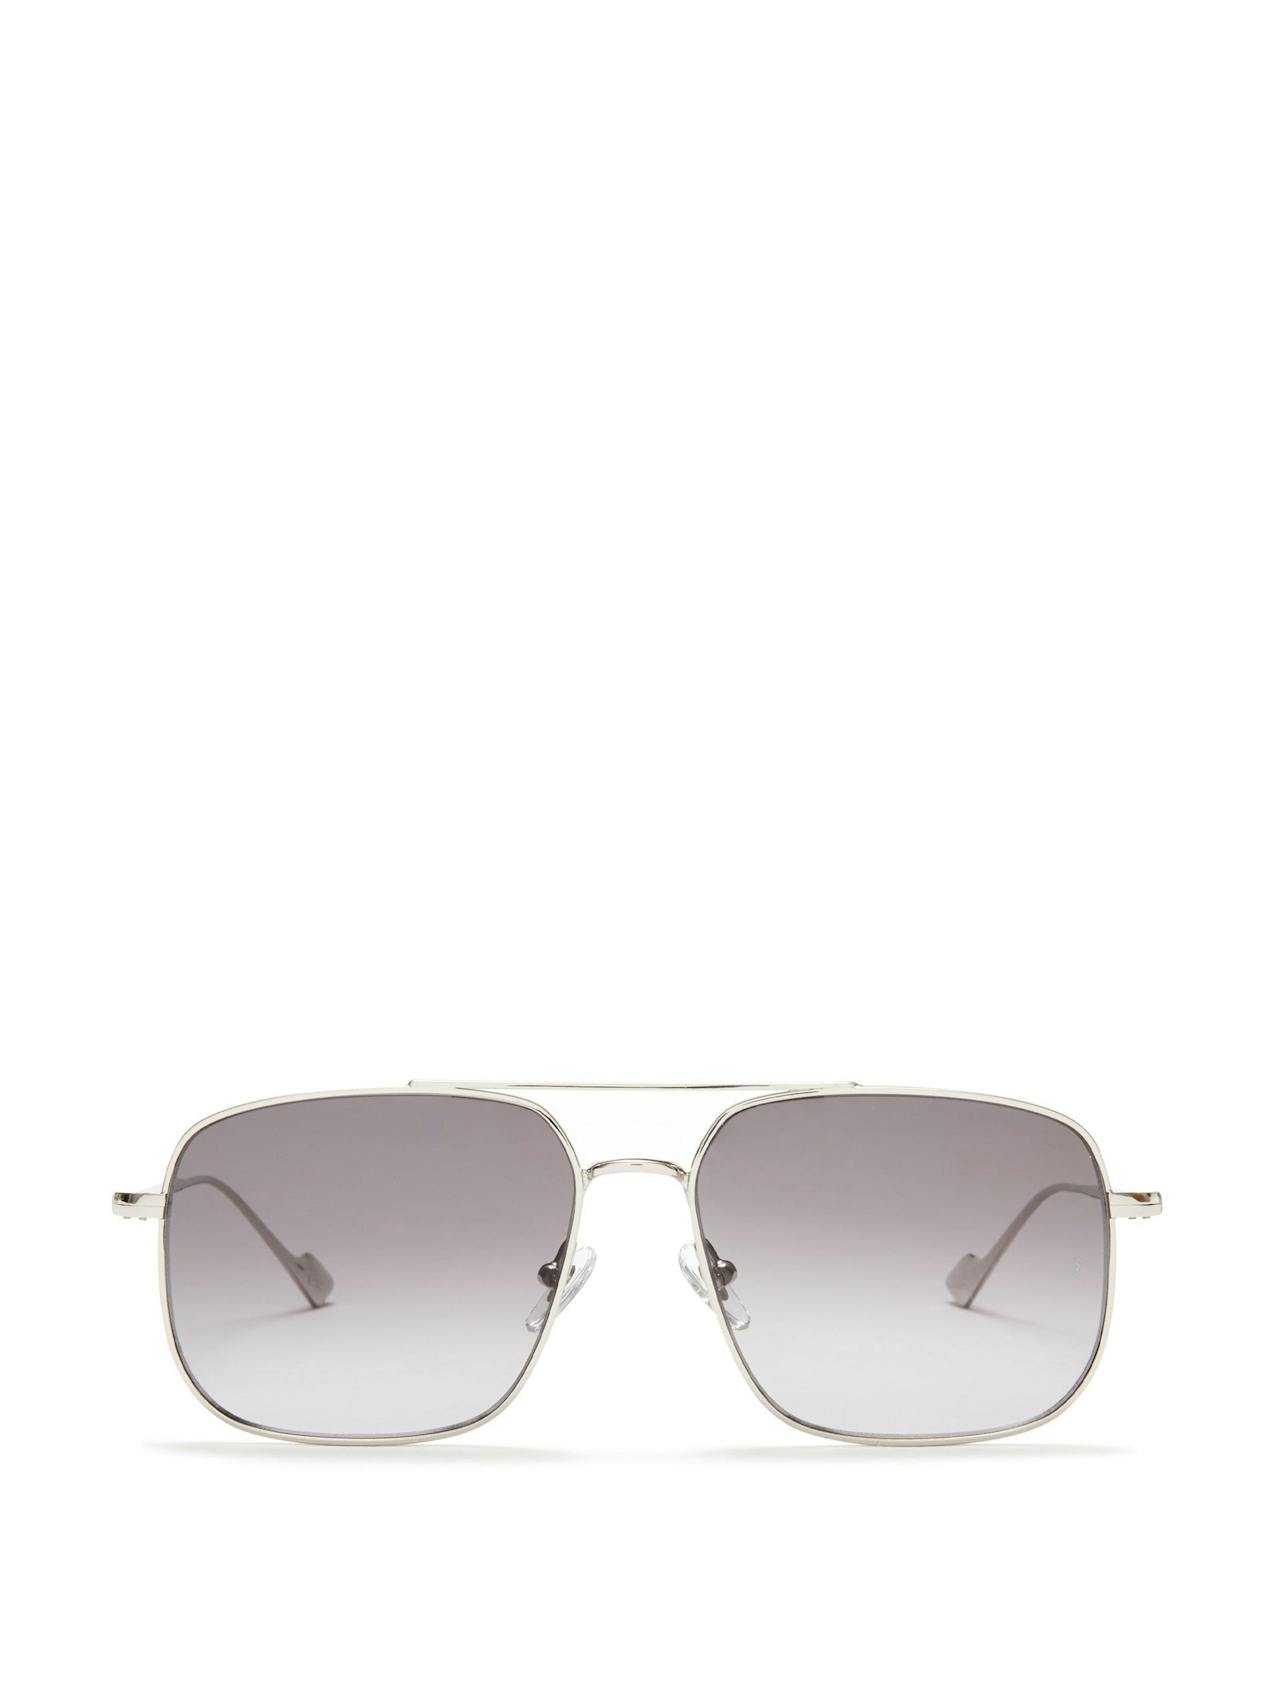 Silver Andy sunglasses